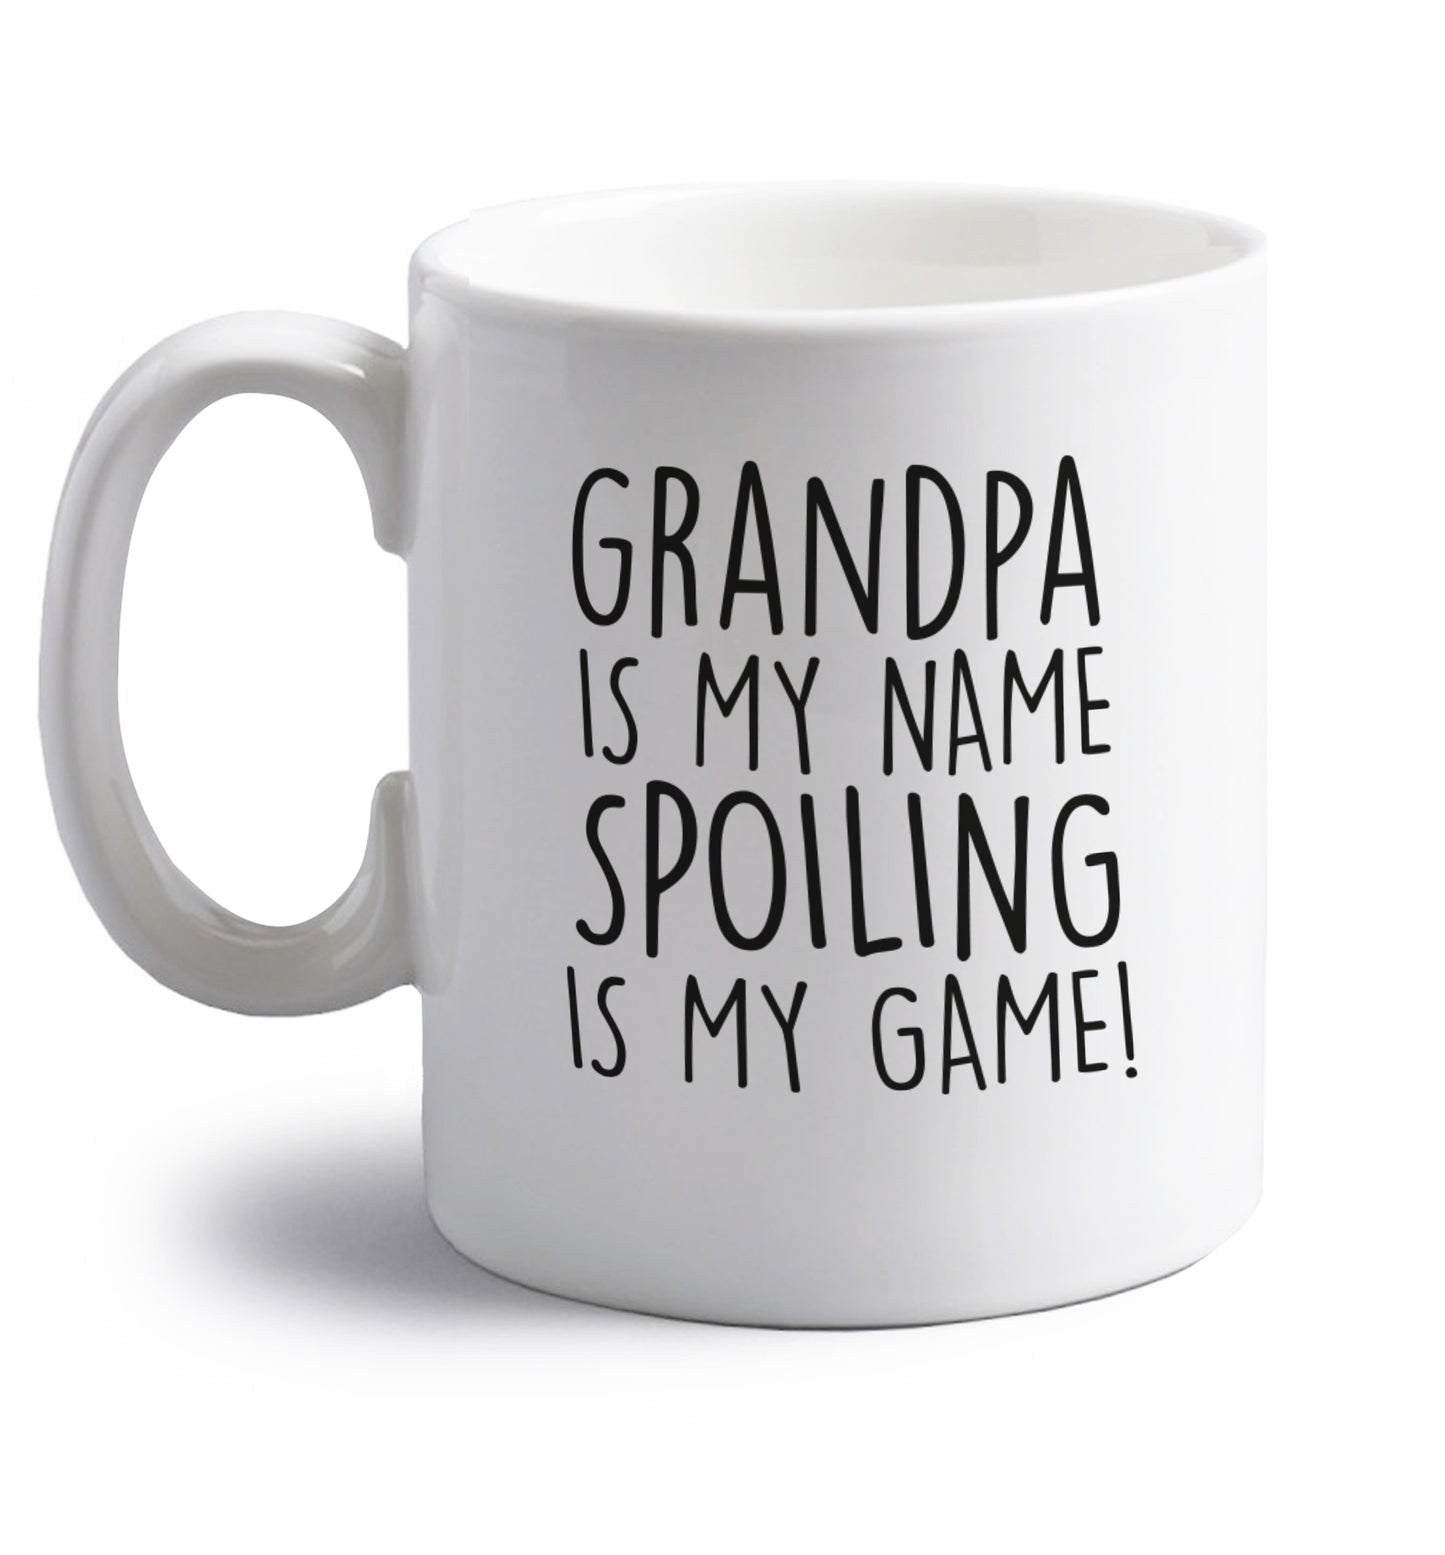 Grandpa is my name, spoiling is my game right handed white ceramic mug 